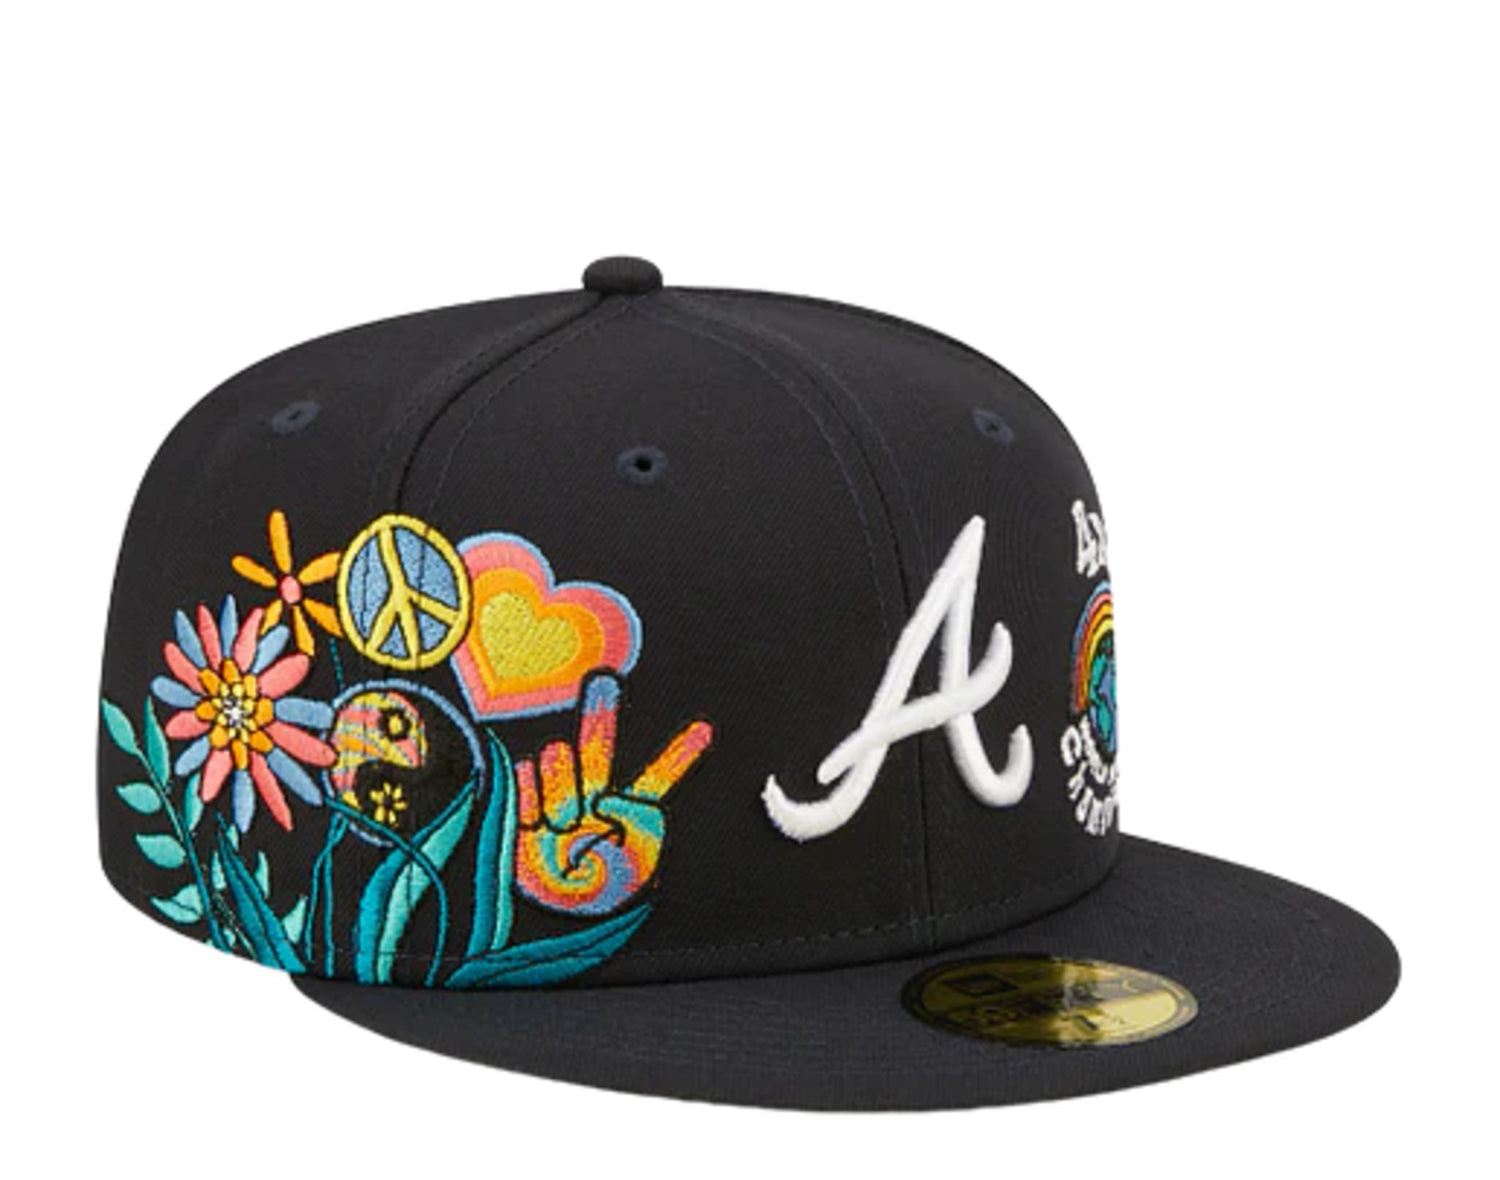 New Era 59Fifty MLB Atlanta Braves Groovy Fitted Hat